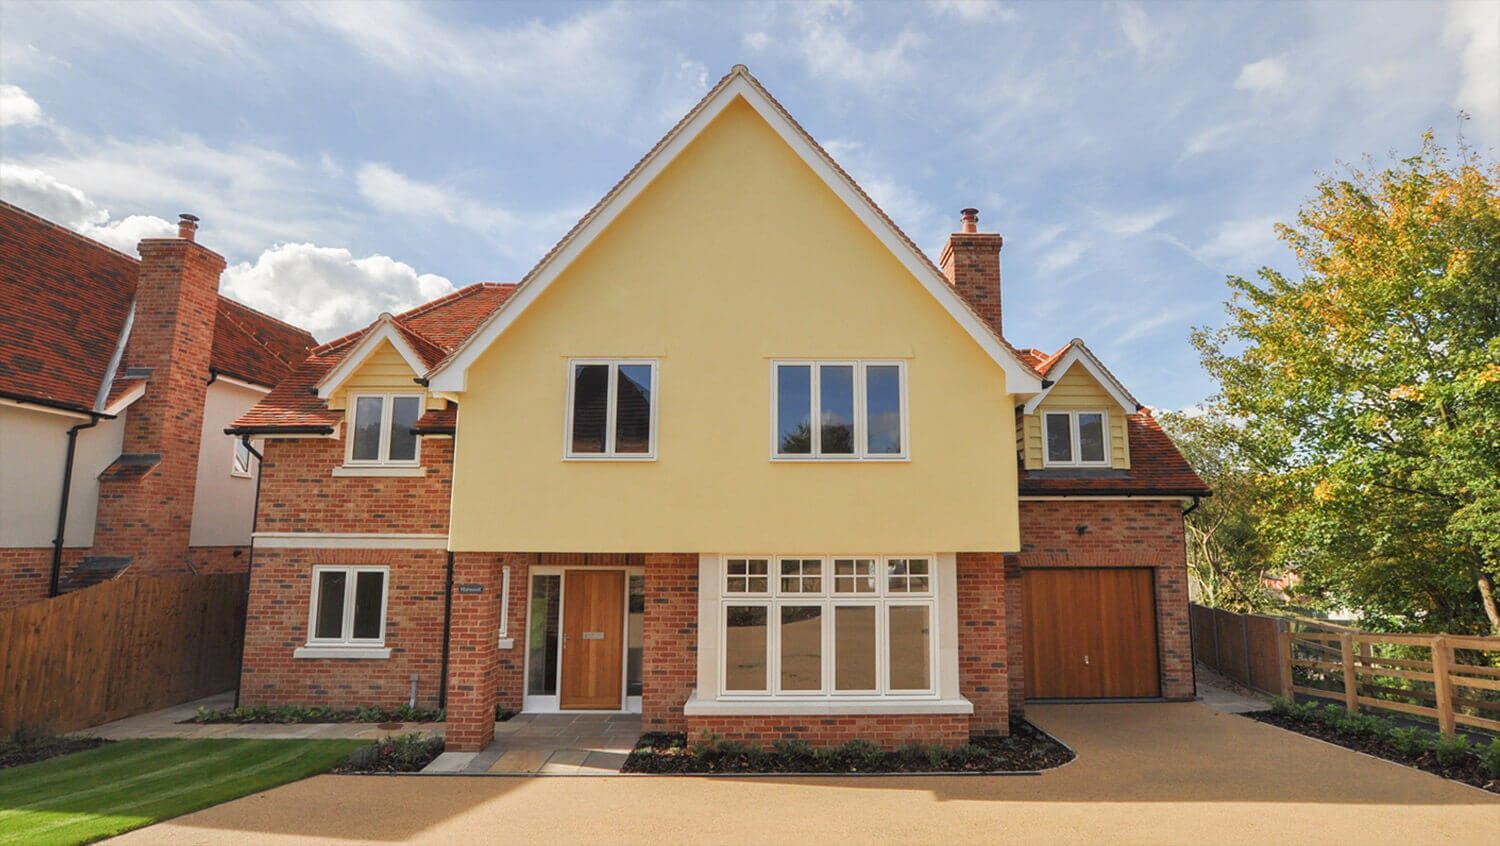 The front view of Harwood, a four-bed house in our Calvert Close development.